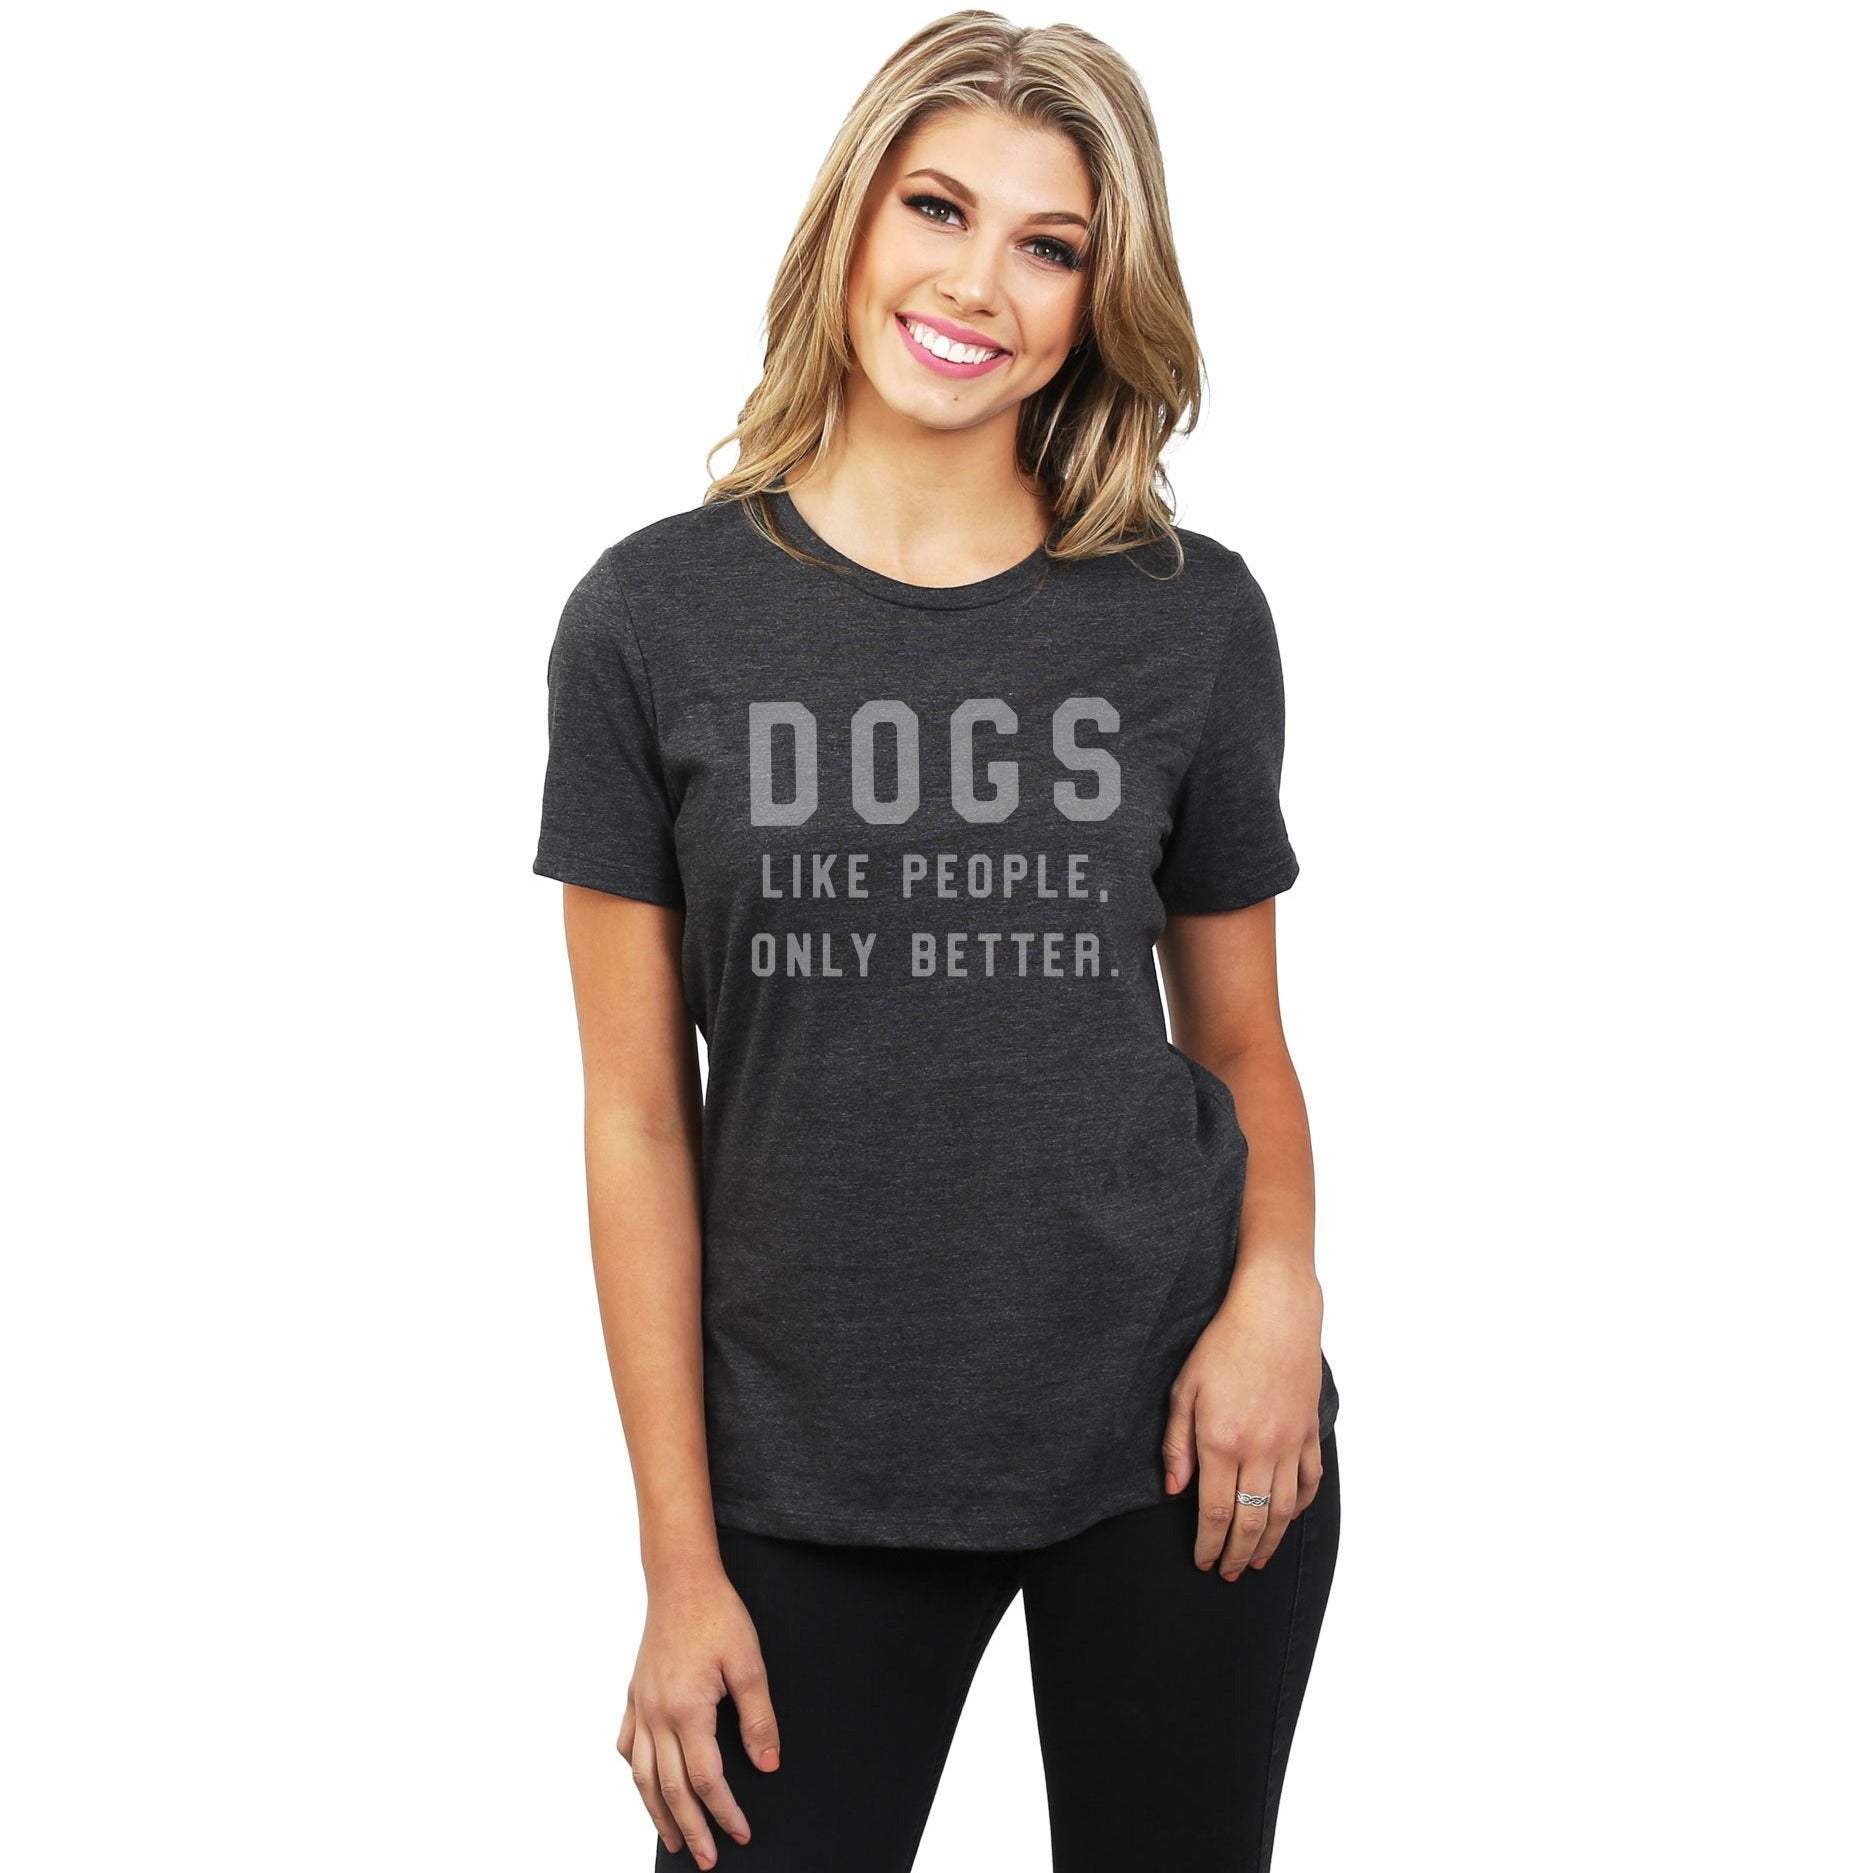 Dogs Like People Only Better Women's Relaxed Crewneck T-Shirt Top Tee Charcoal Model
